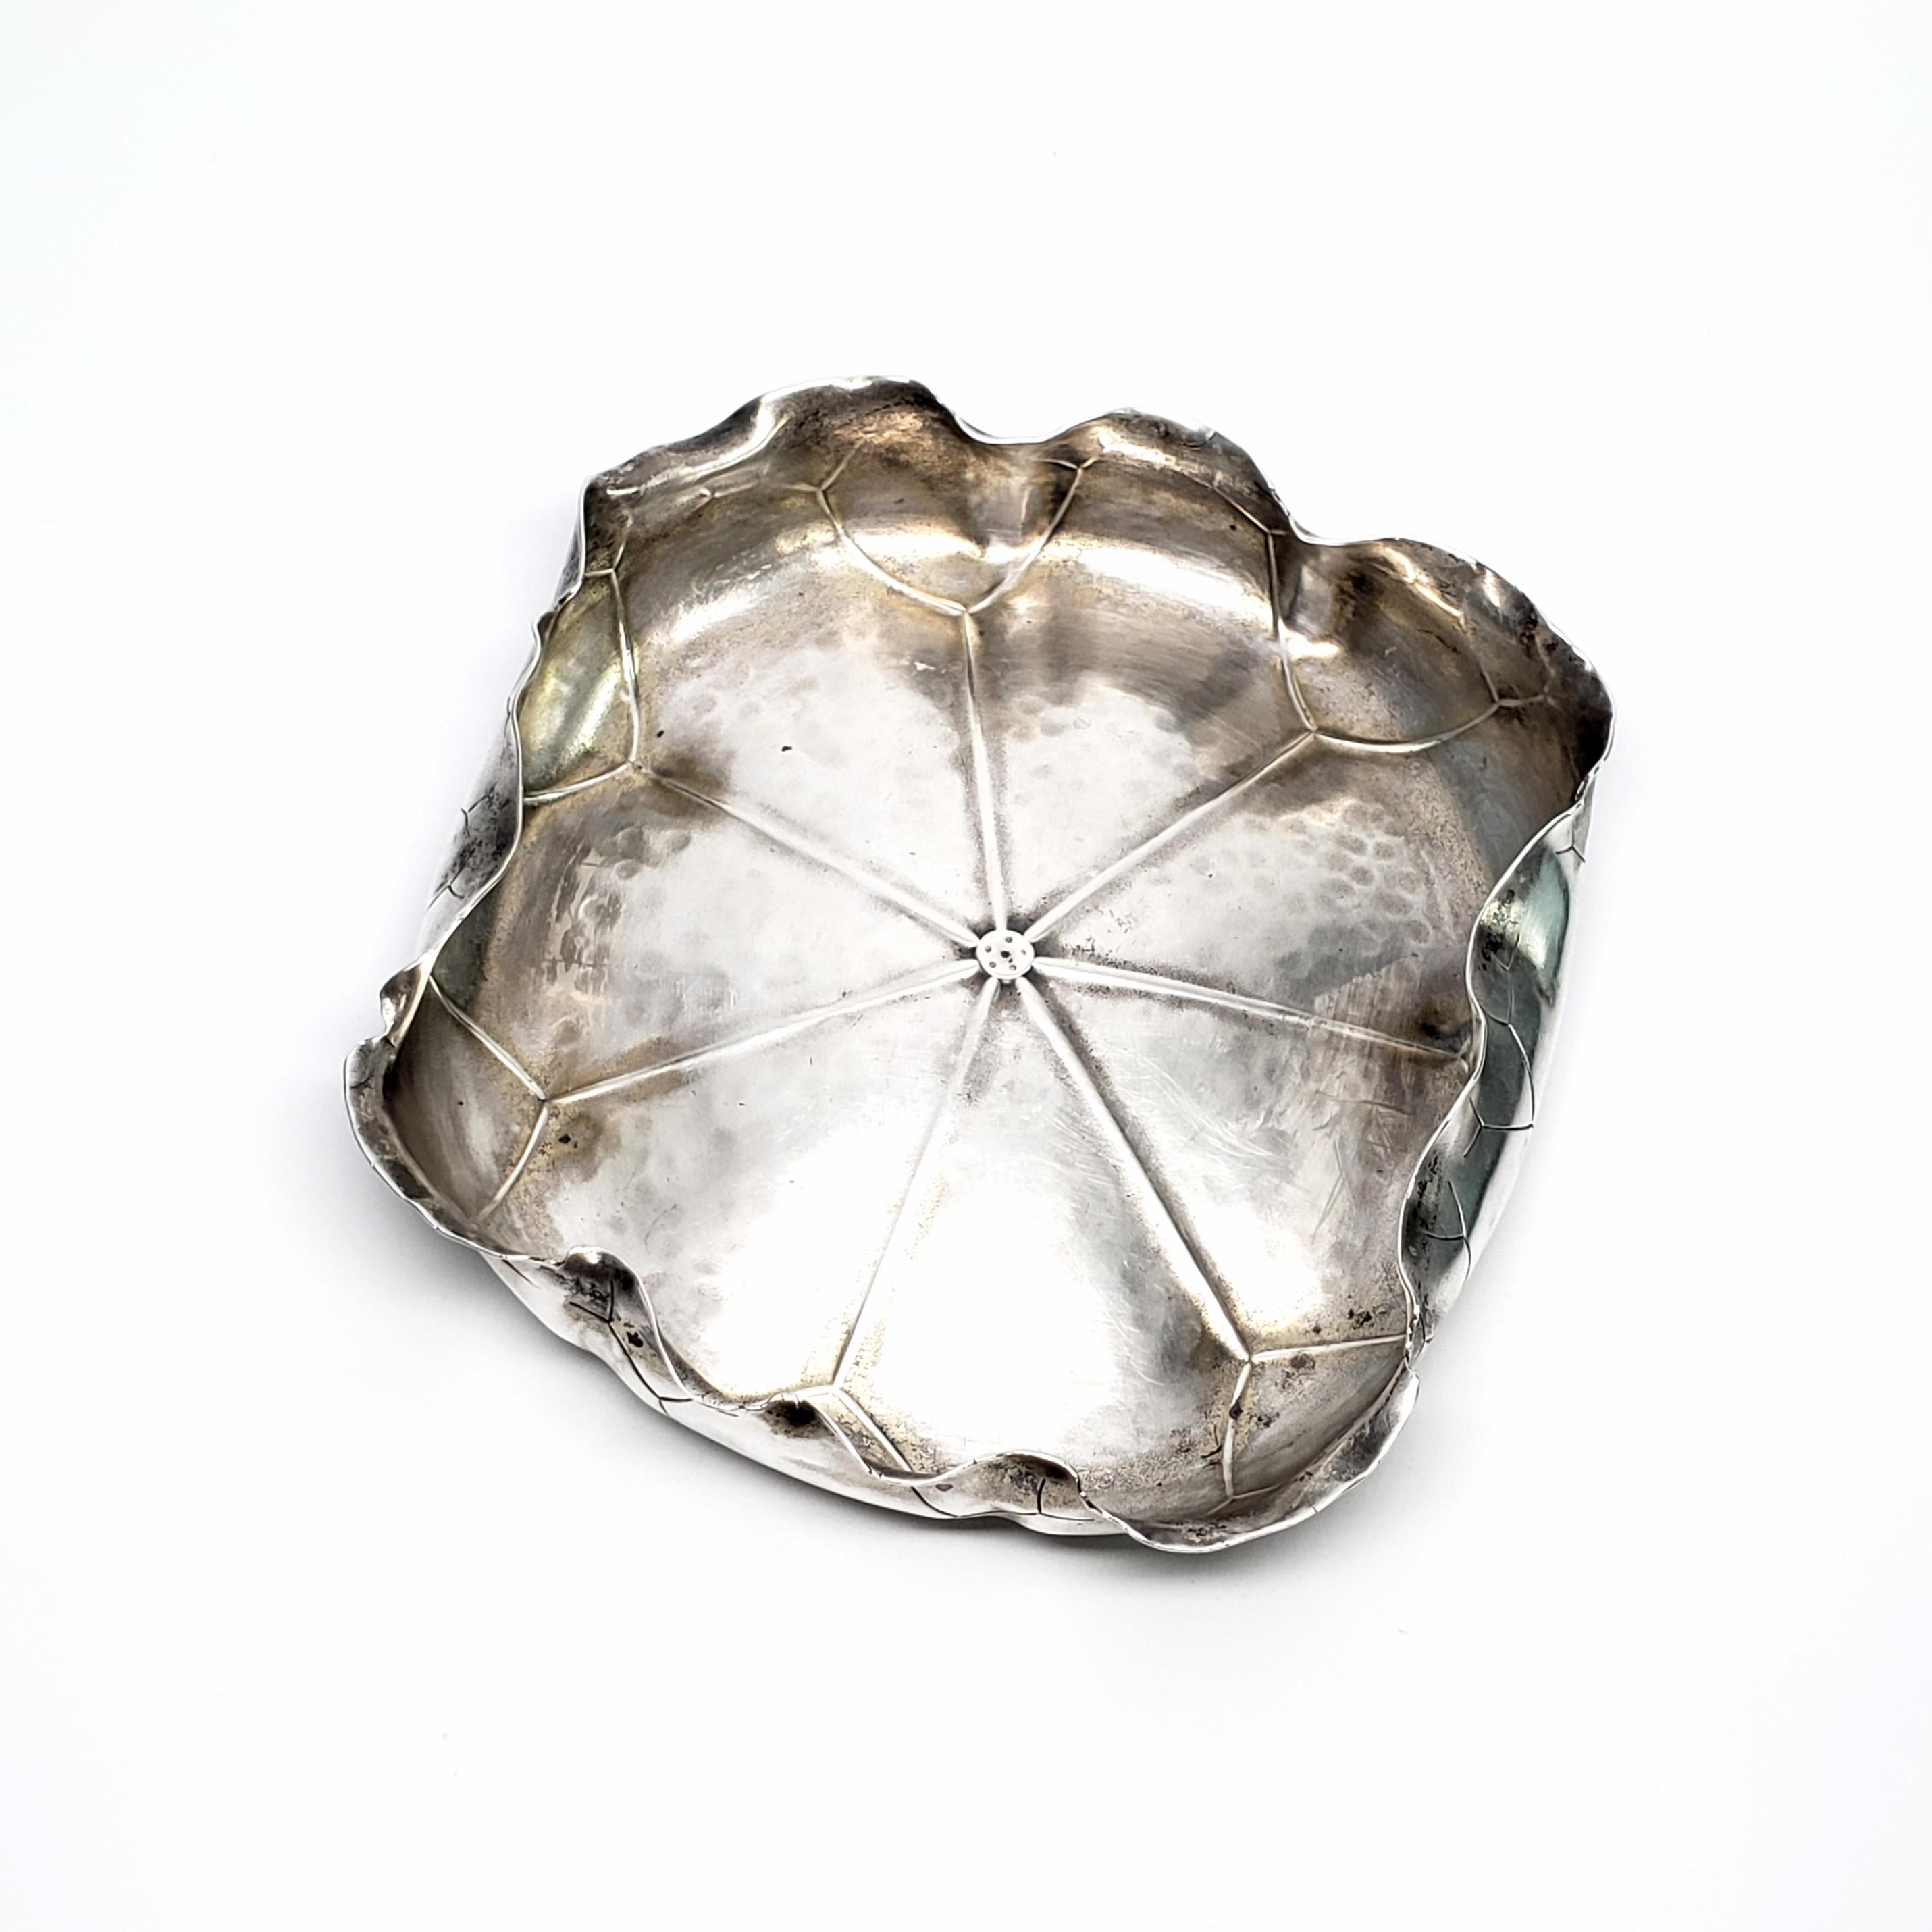 Sterling silver lily pad bowl bowl George W Shiebler & Co of NY, NY, circa 1880.

This beautiful and unique hand hammered bowl features a turned up rim with asymmetrical curved edges and etched leaf veins.

Measures approx 5